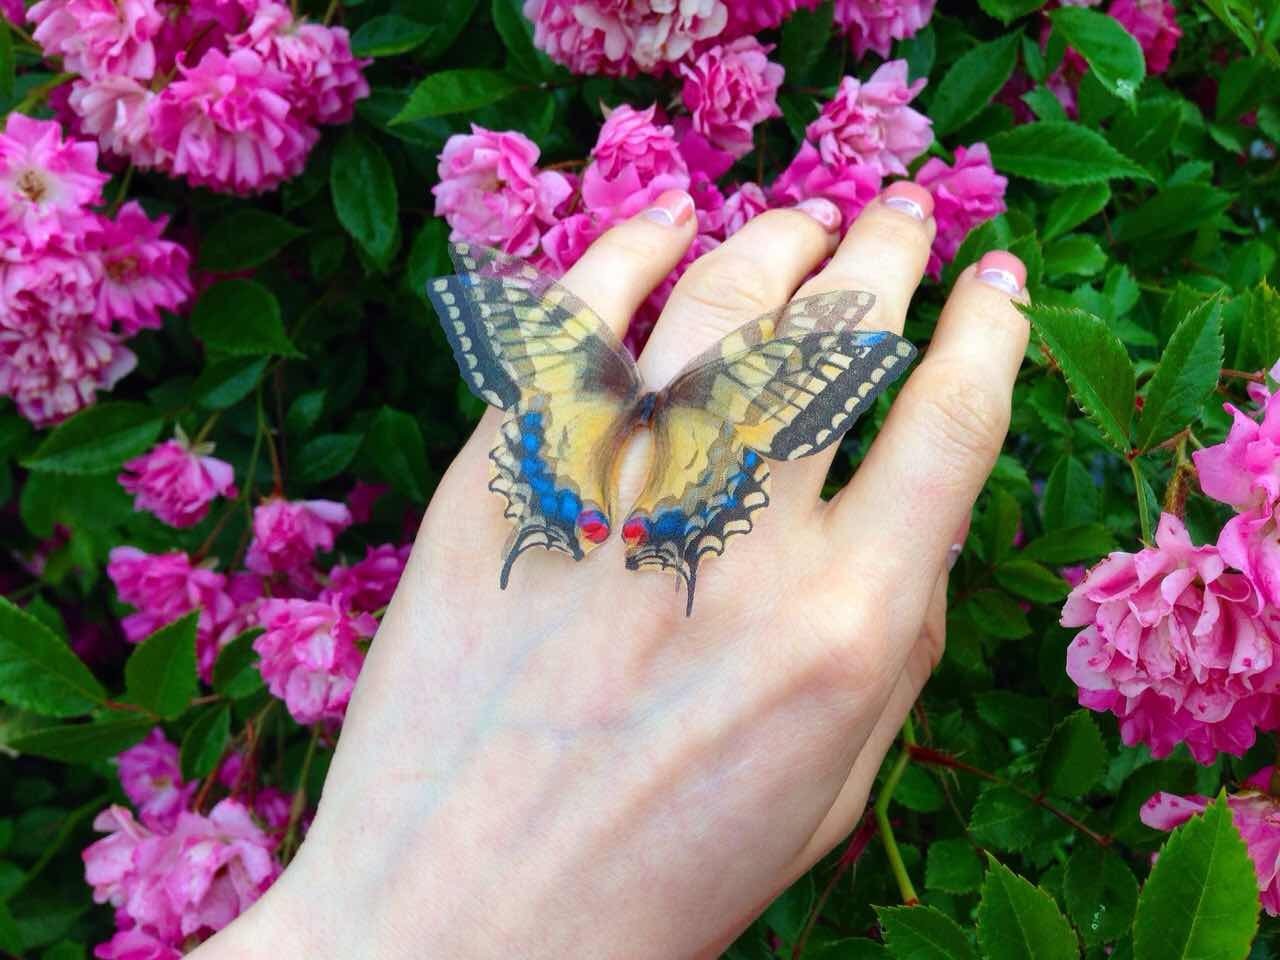 Beautiful ring with a stunning Swallowtail Butterfly design